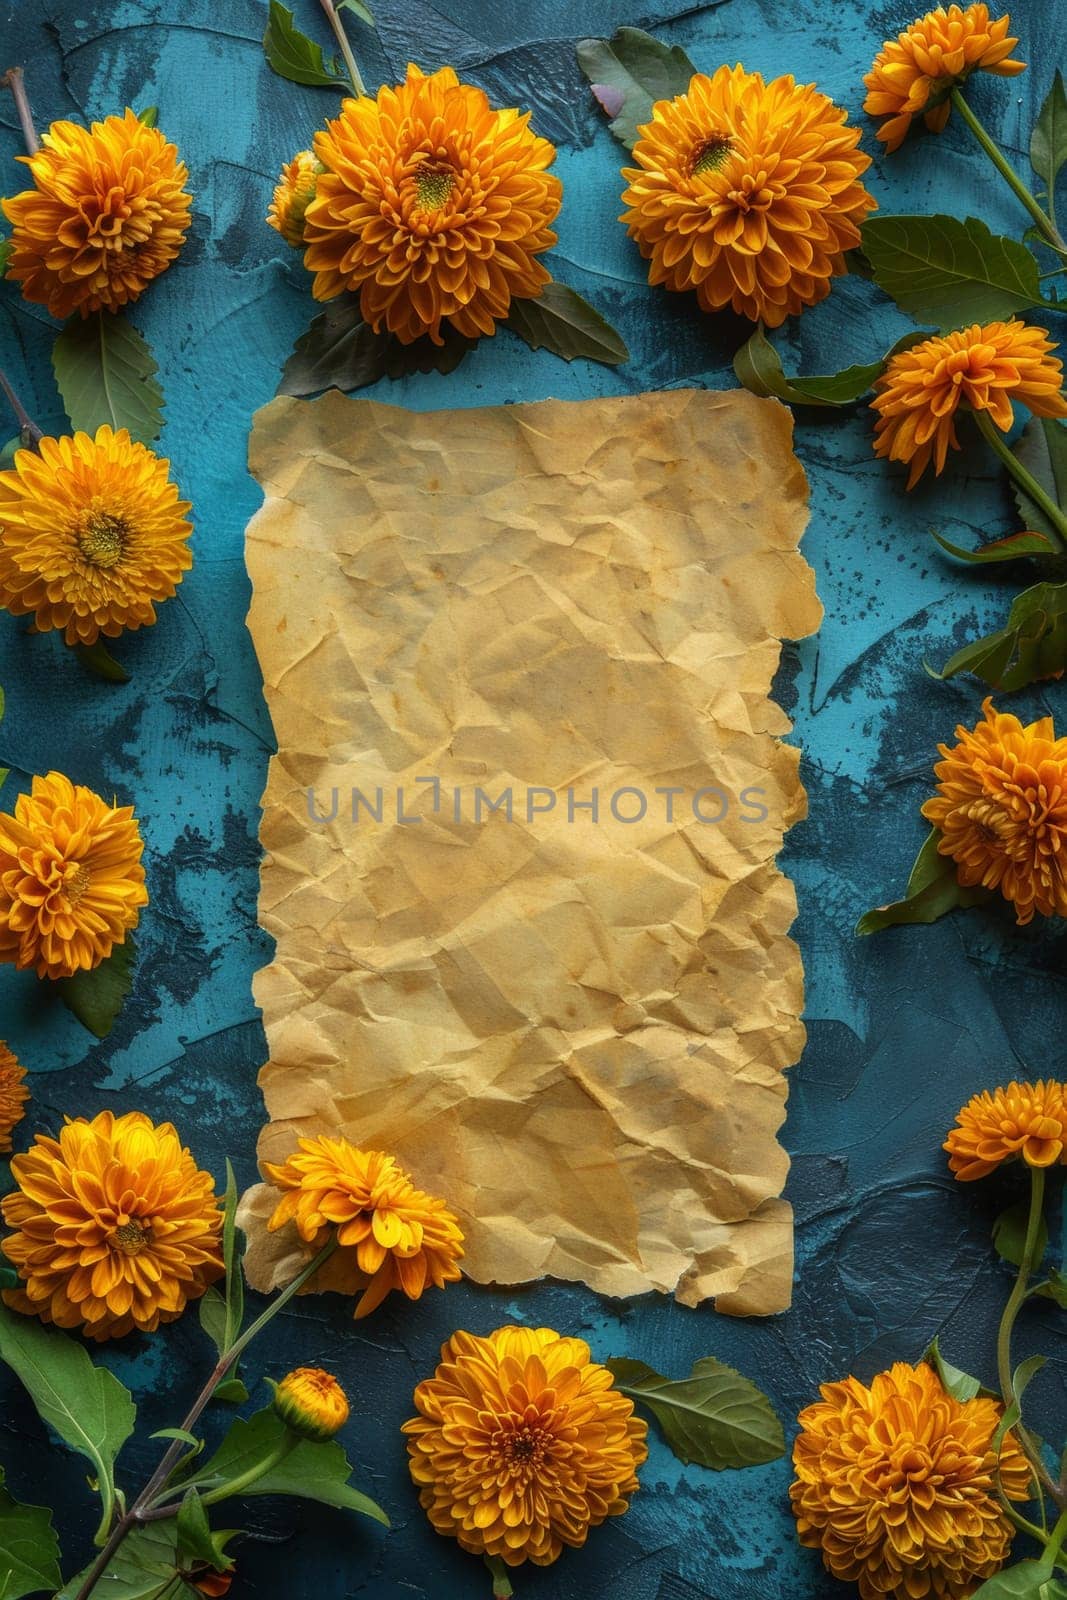 A piece of a sheet with flowers and leaves surrounding it